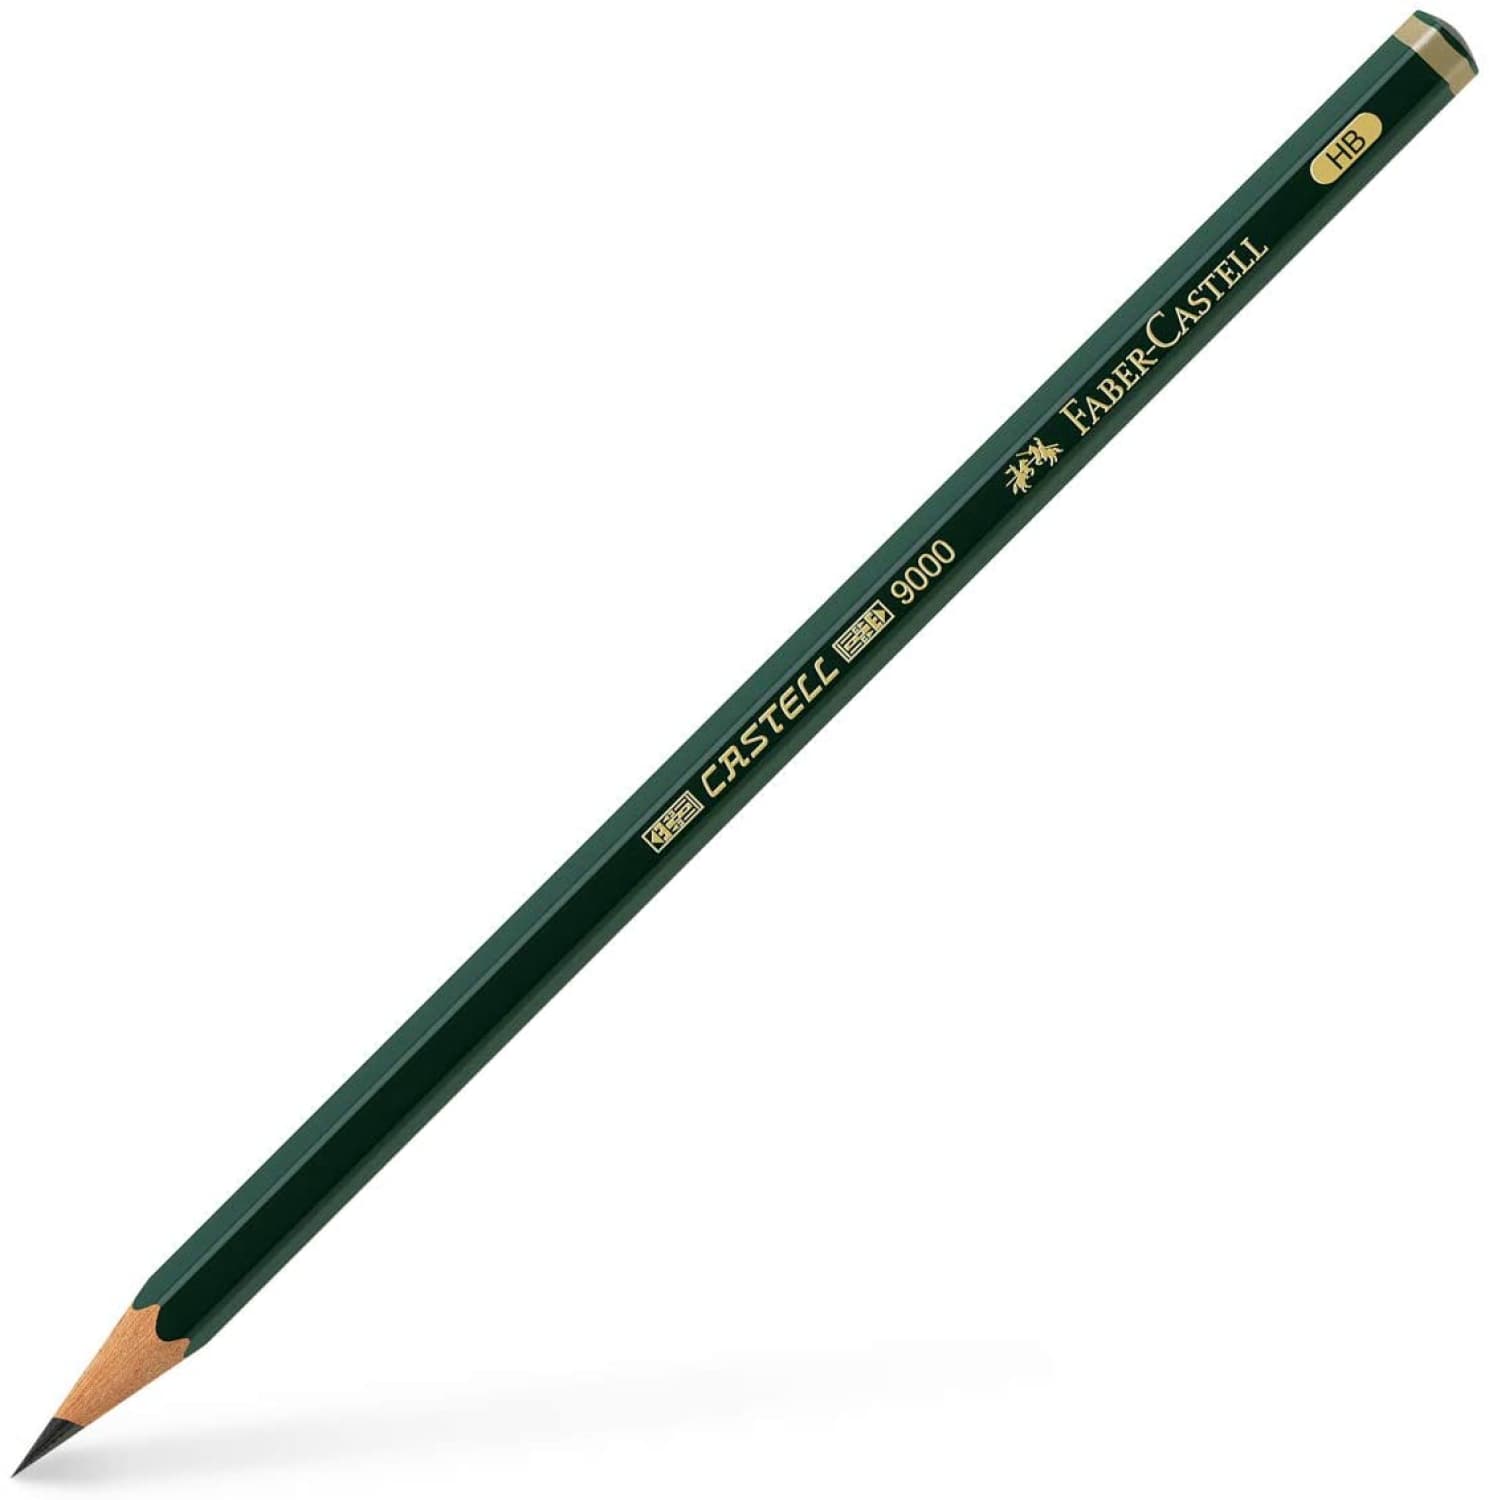 Faber-Castell USA 119000 Castell 9000 Series Graphite Pencil HB